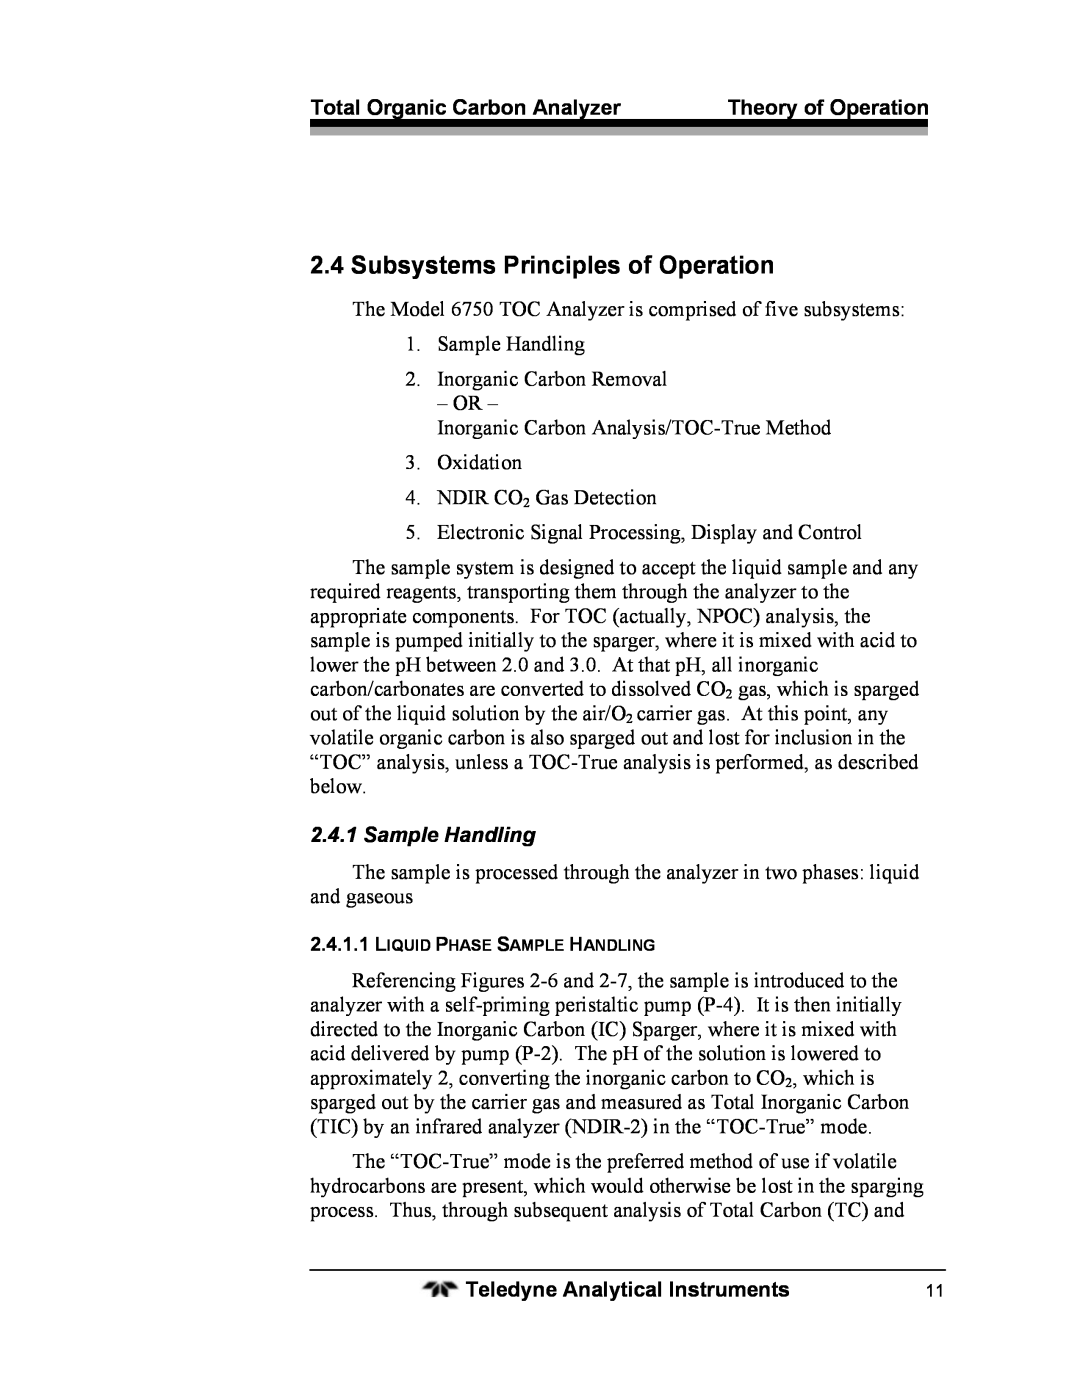 Teledyne 6750 operating instructions Subsystems Principles of Operation, Sample Handling 